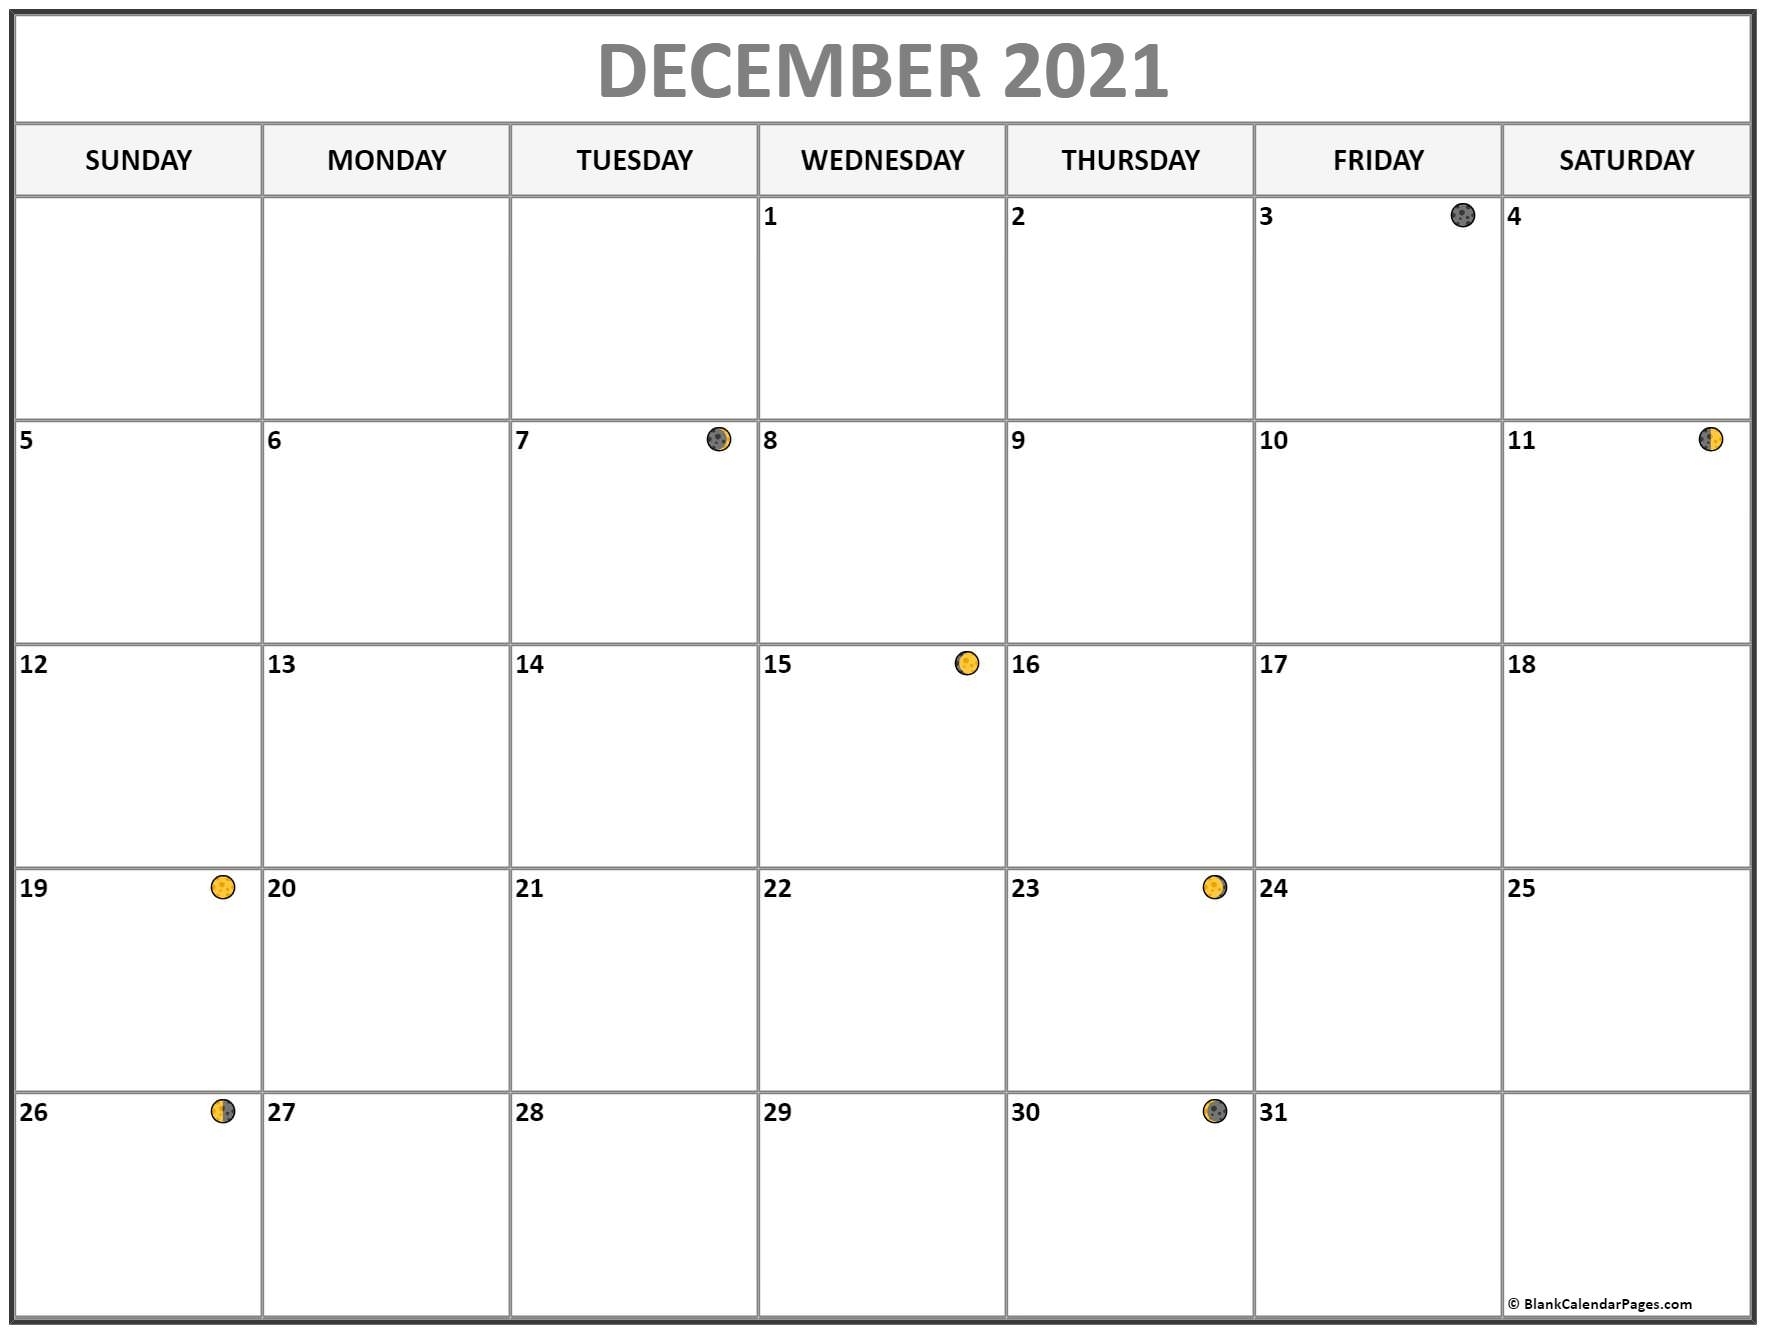 Catch December 2021 Moon Phase